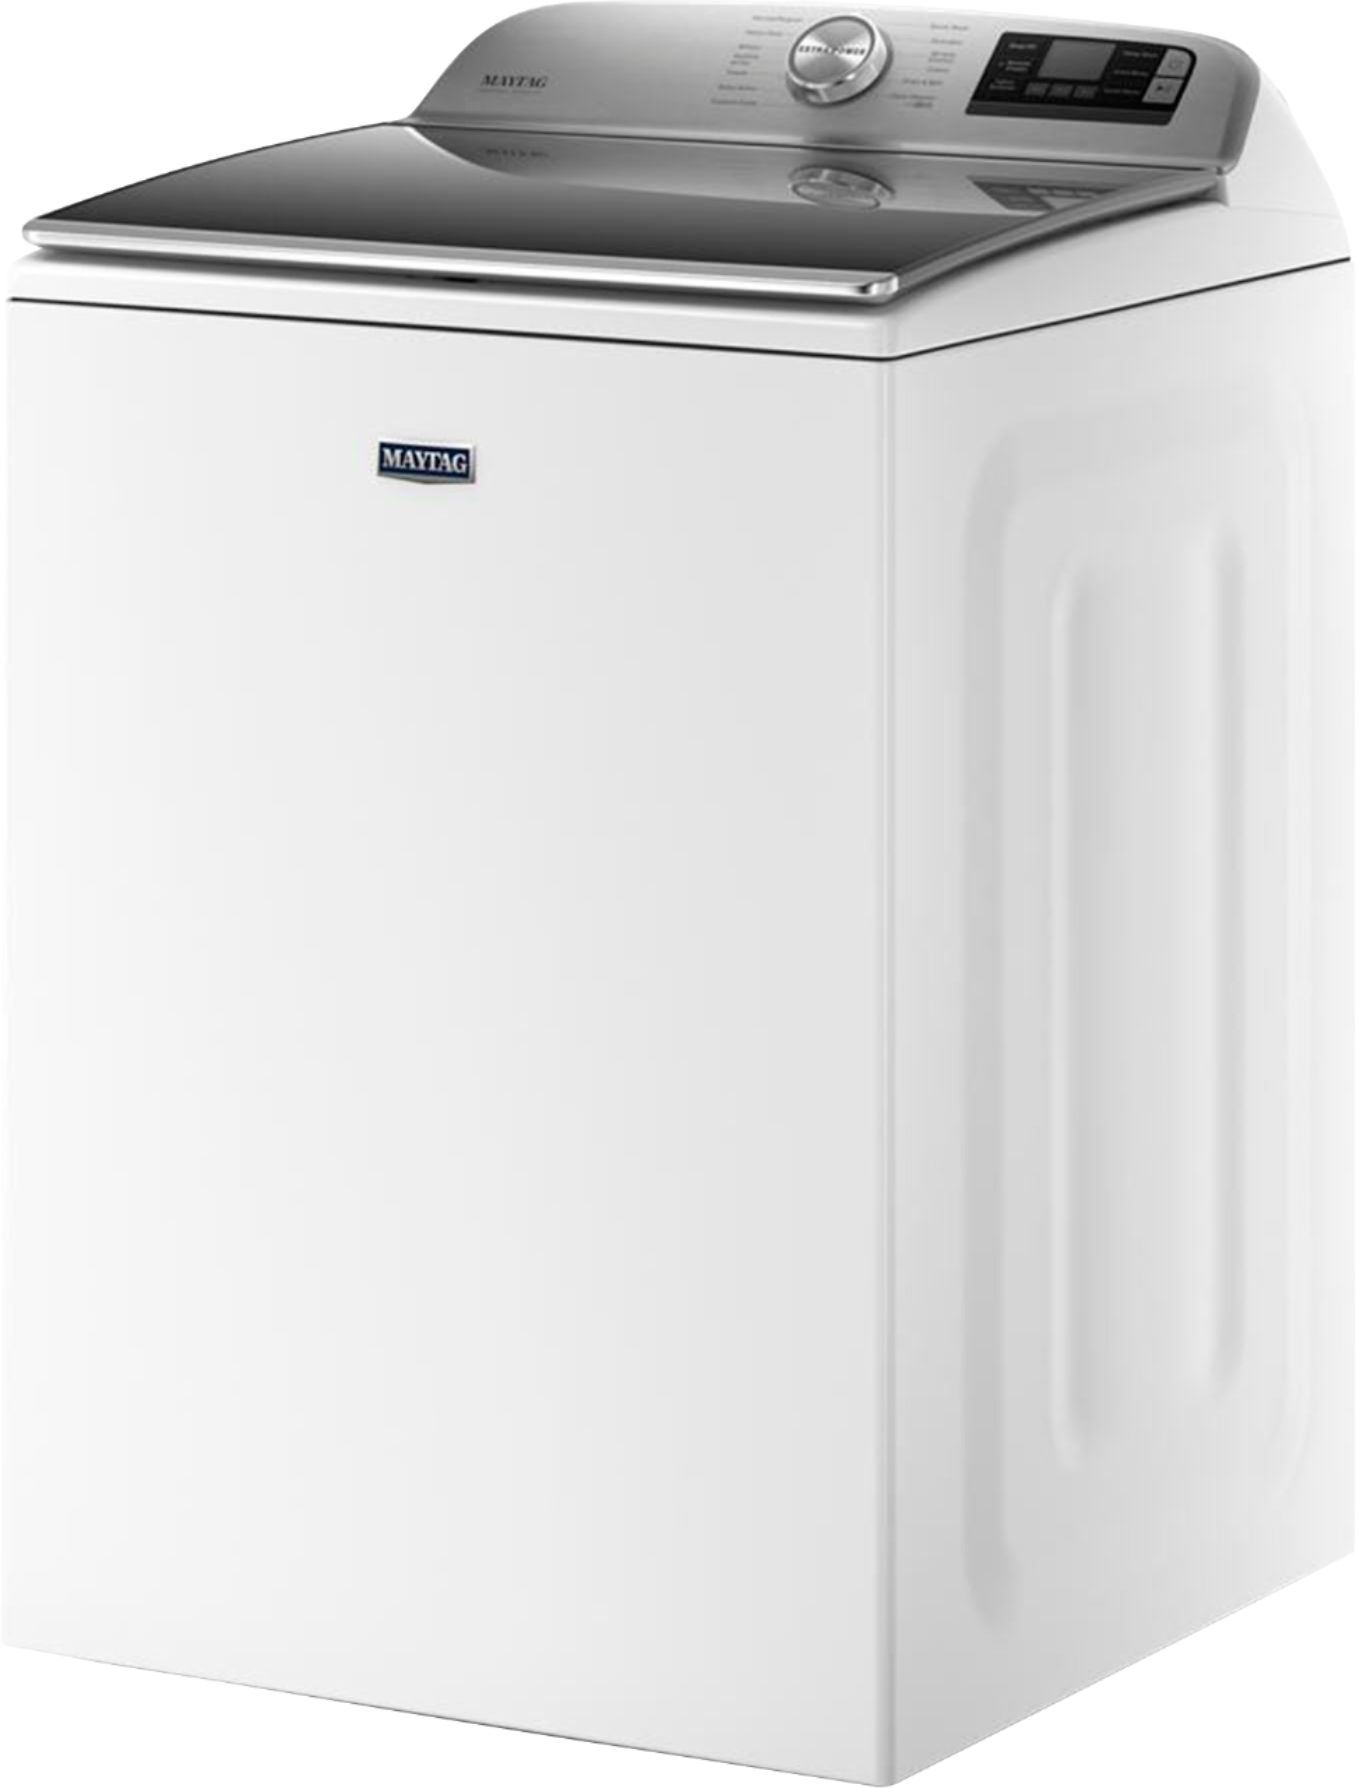 Left View: Maytag - 5.2 Cu. Ft. High Efficiency Smart Top Load Washer with Extra Power Button - White